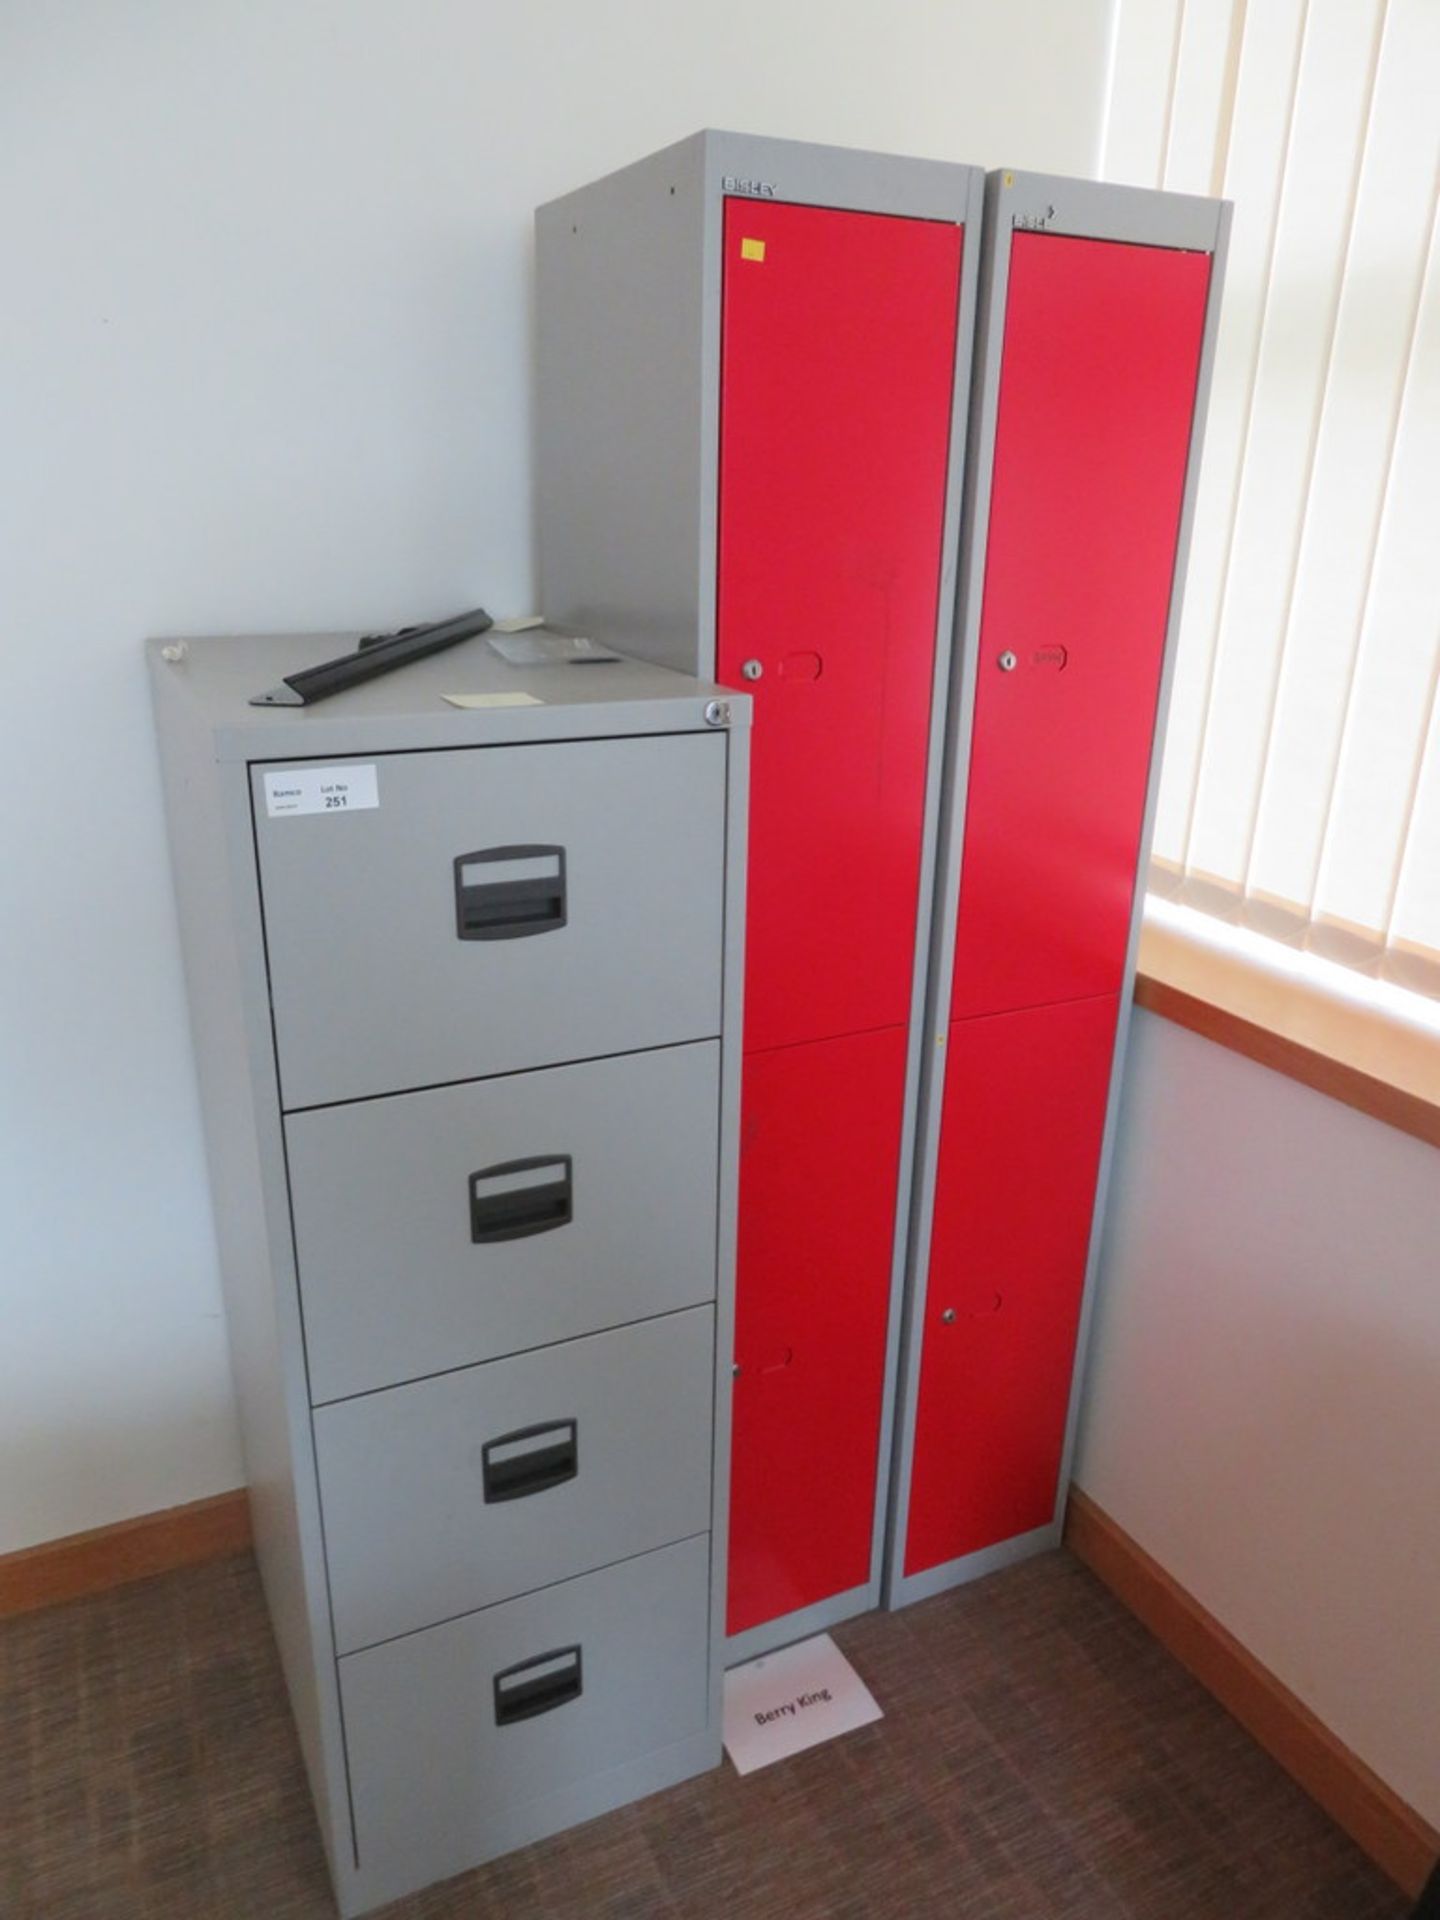 2 X TWO DOOR LOCKERS AND GREY METAL FOUR DRAWER FILING CABINET